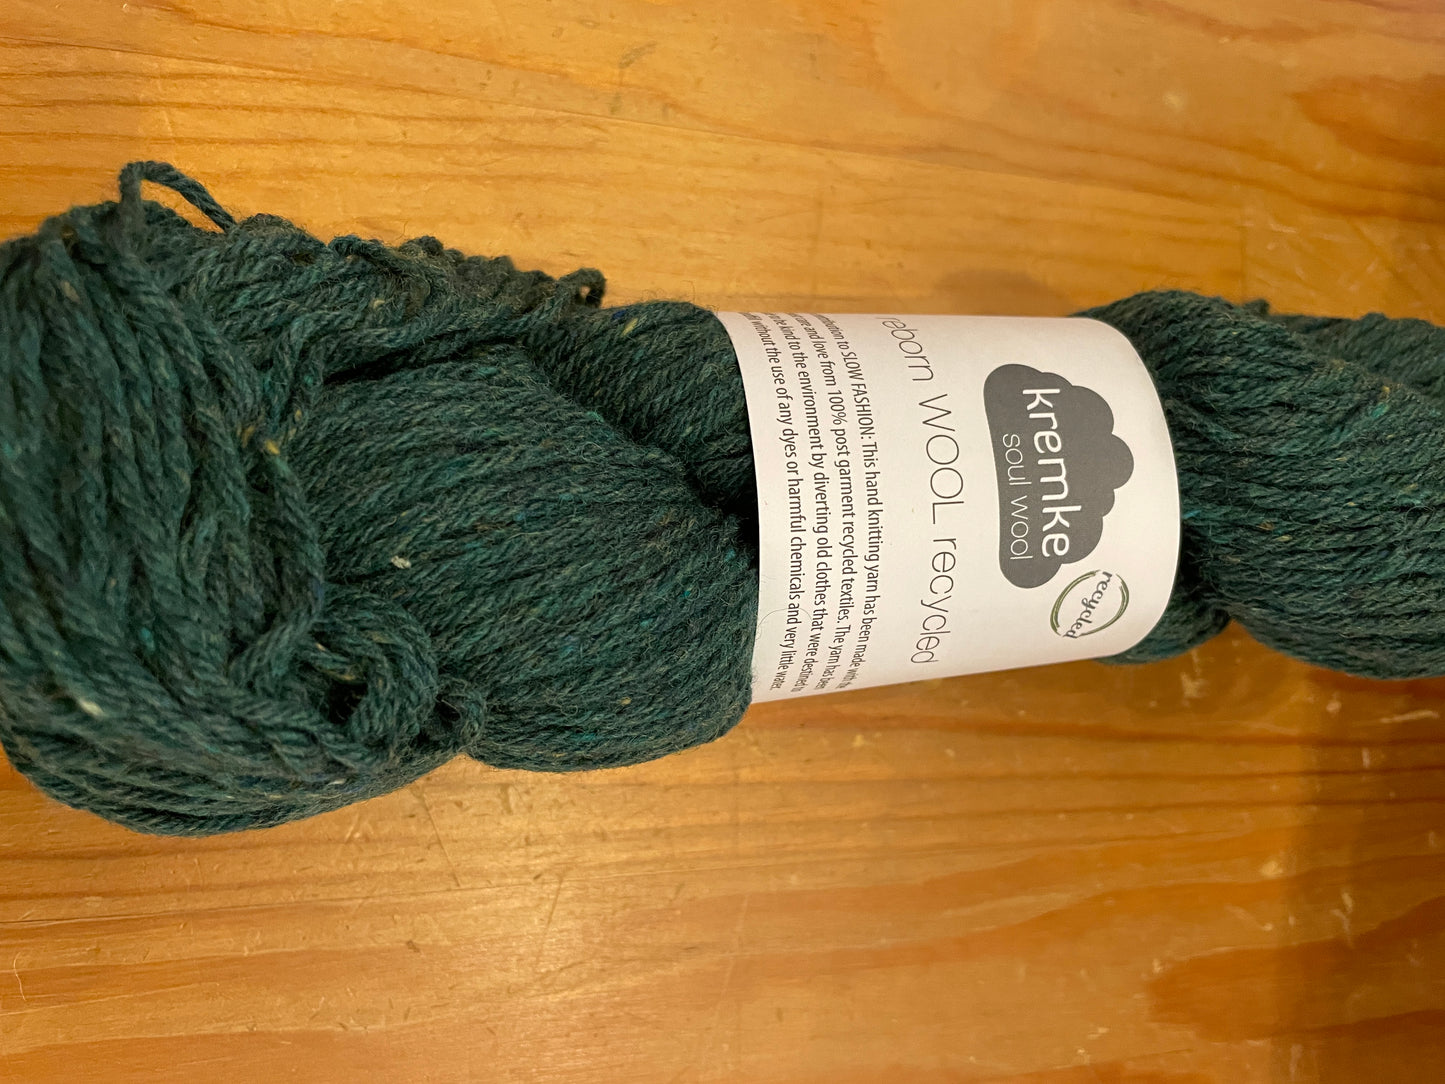 Reborn Yarn - Recycled Wool Blend - DK Weight - 3 Colors